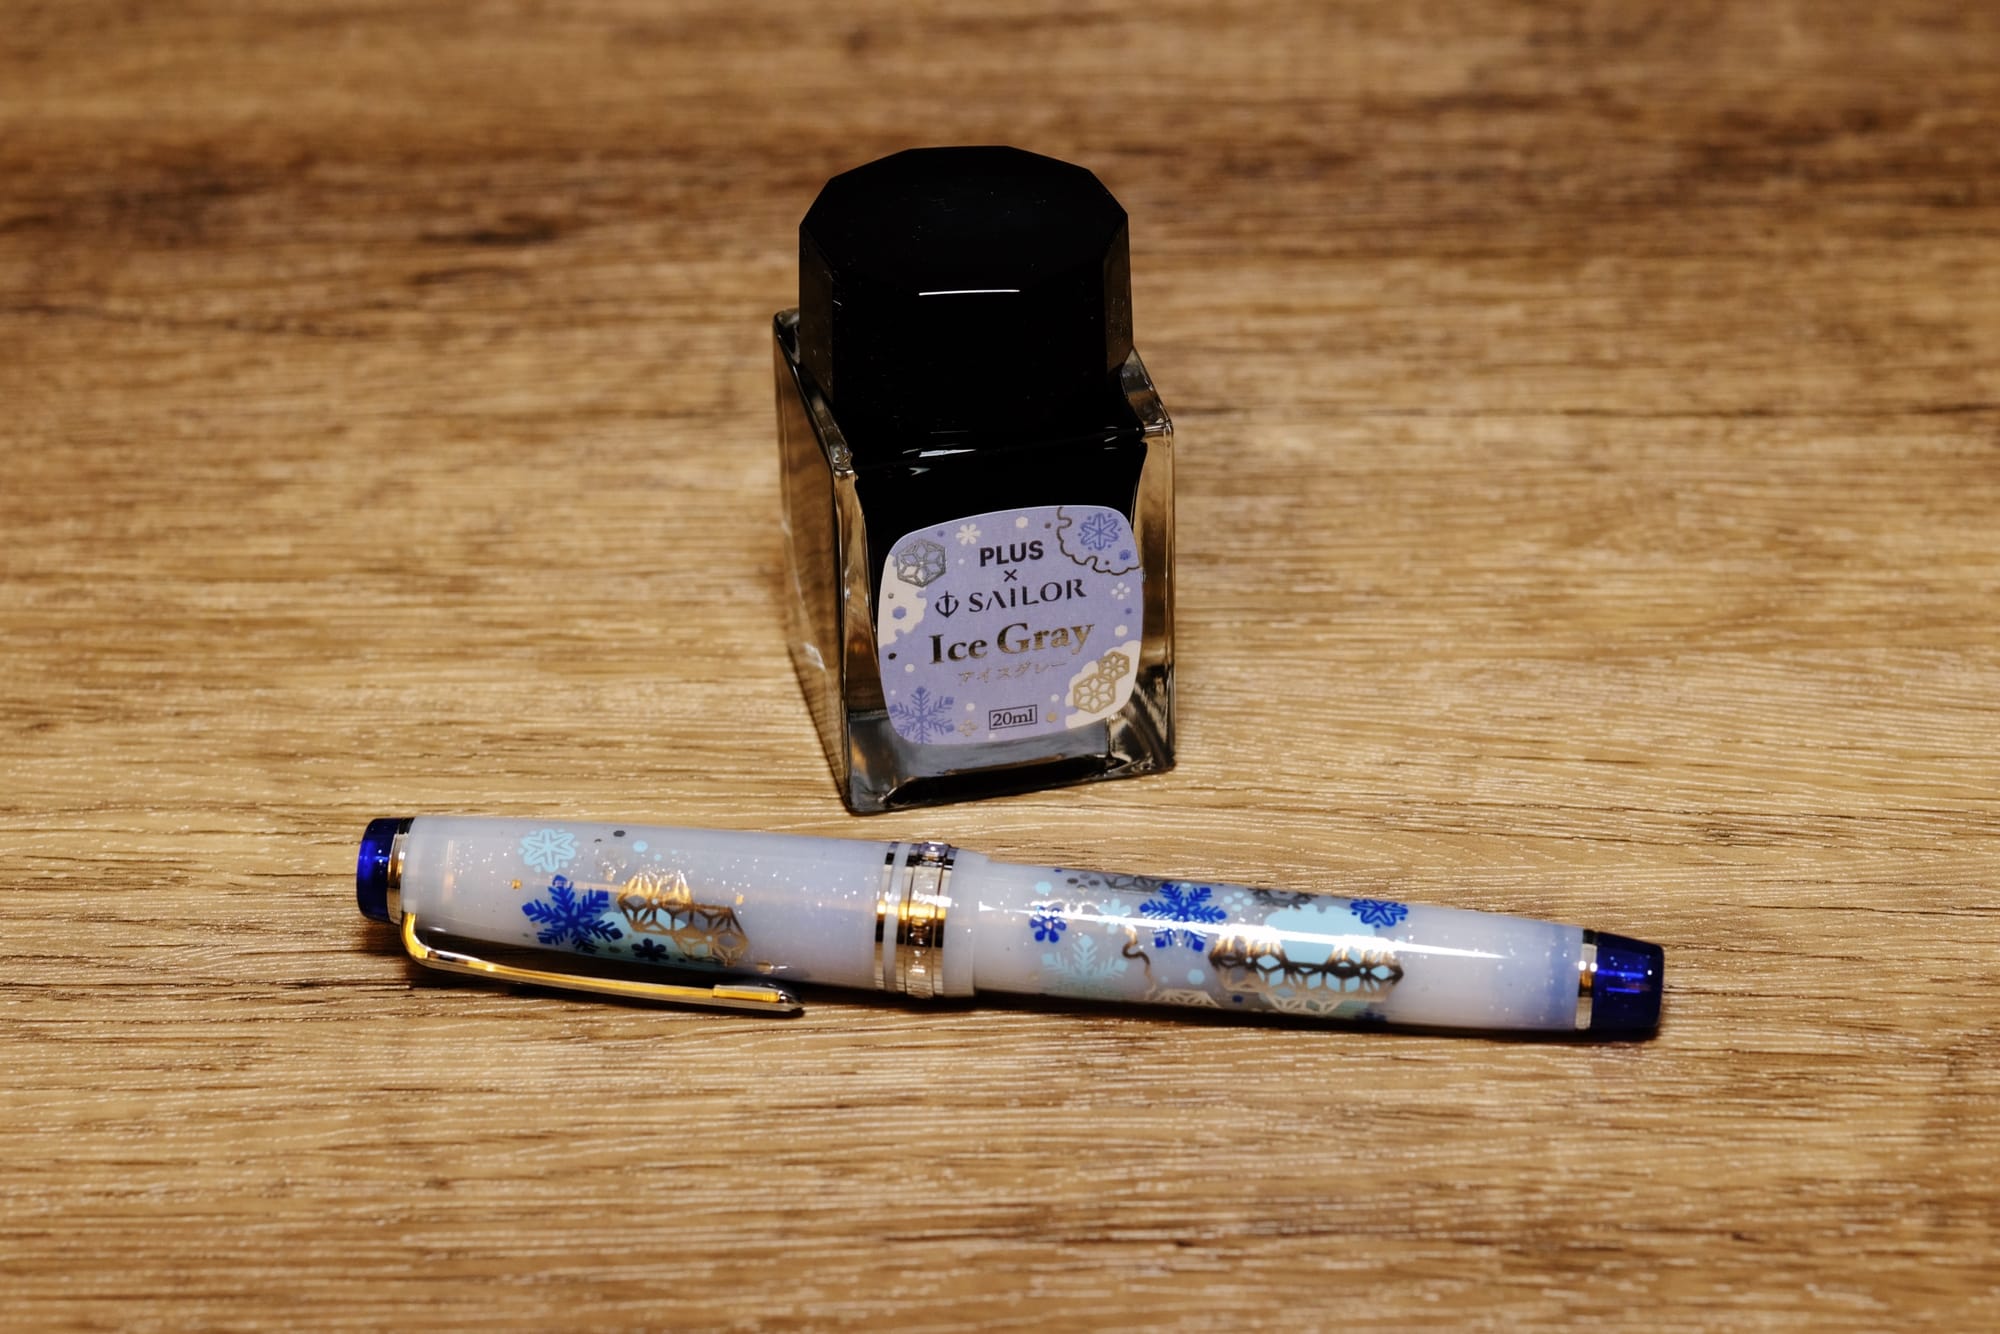 Small glass bottle of fountain pen ink, Ice Gray, sitting behind a fountain pen with a translucent white body with glitter embedded and snowflake graphics in various shades of blue and silver painted on, and dark blue top and bottom